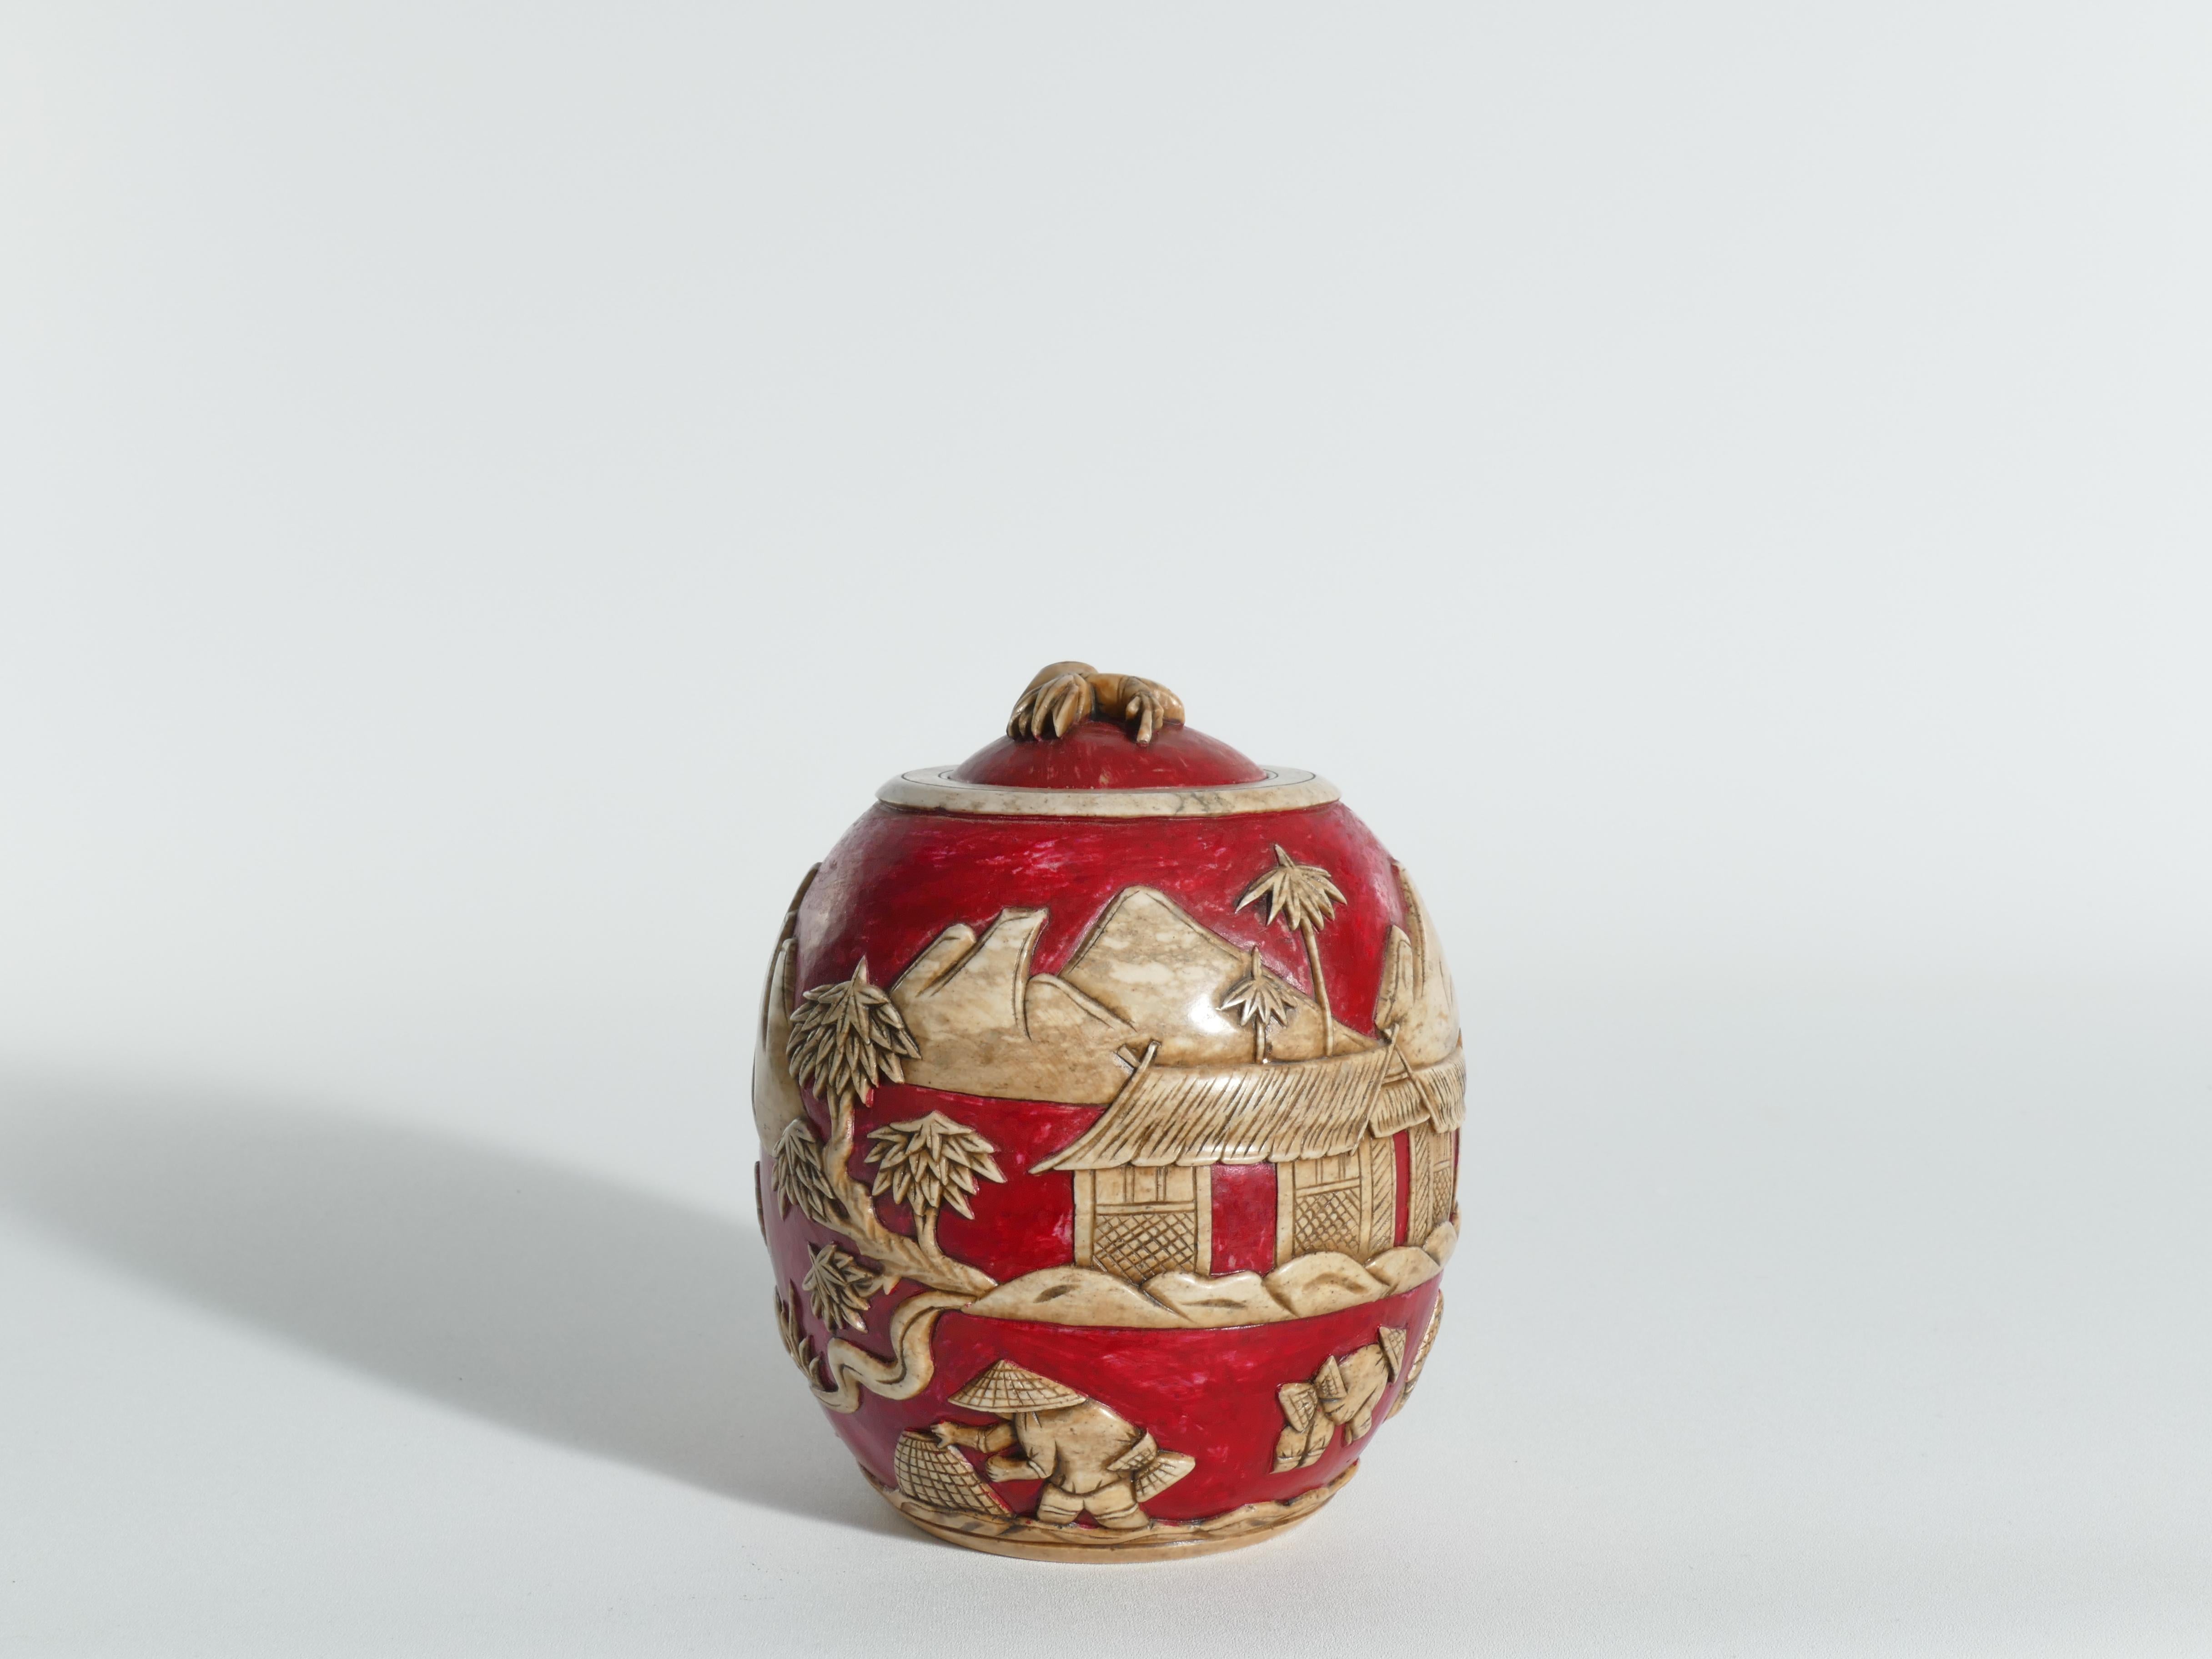 A very beautiful and decorative Vietnamese deep red colored hand carved soapstone lidded jar.The carved details depicting a landscape with workers, a house, trees and mountains are amazing! Since it is made of stone, it is really heavy.  